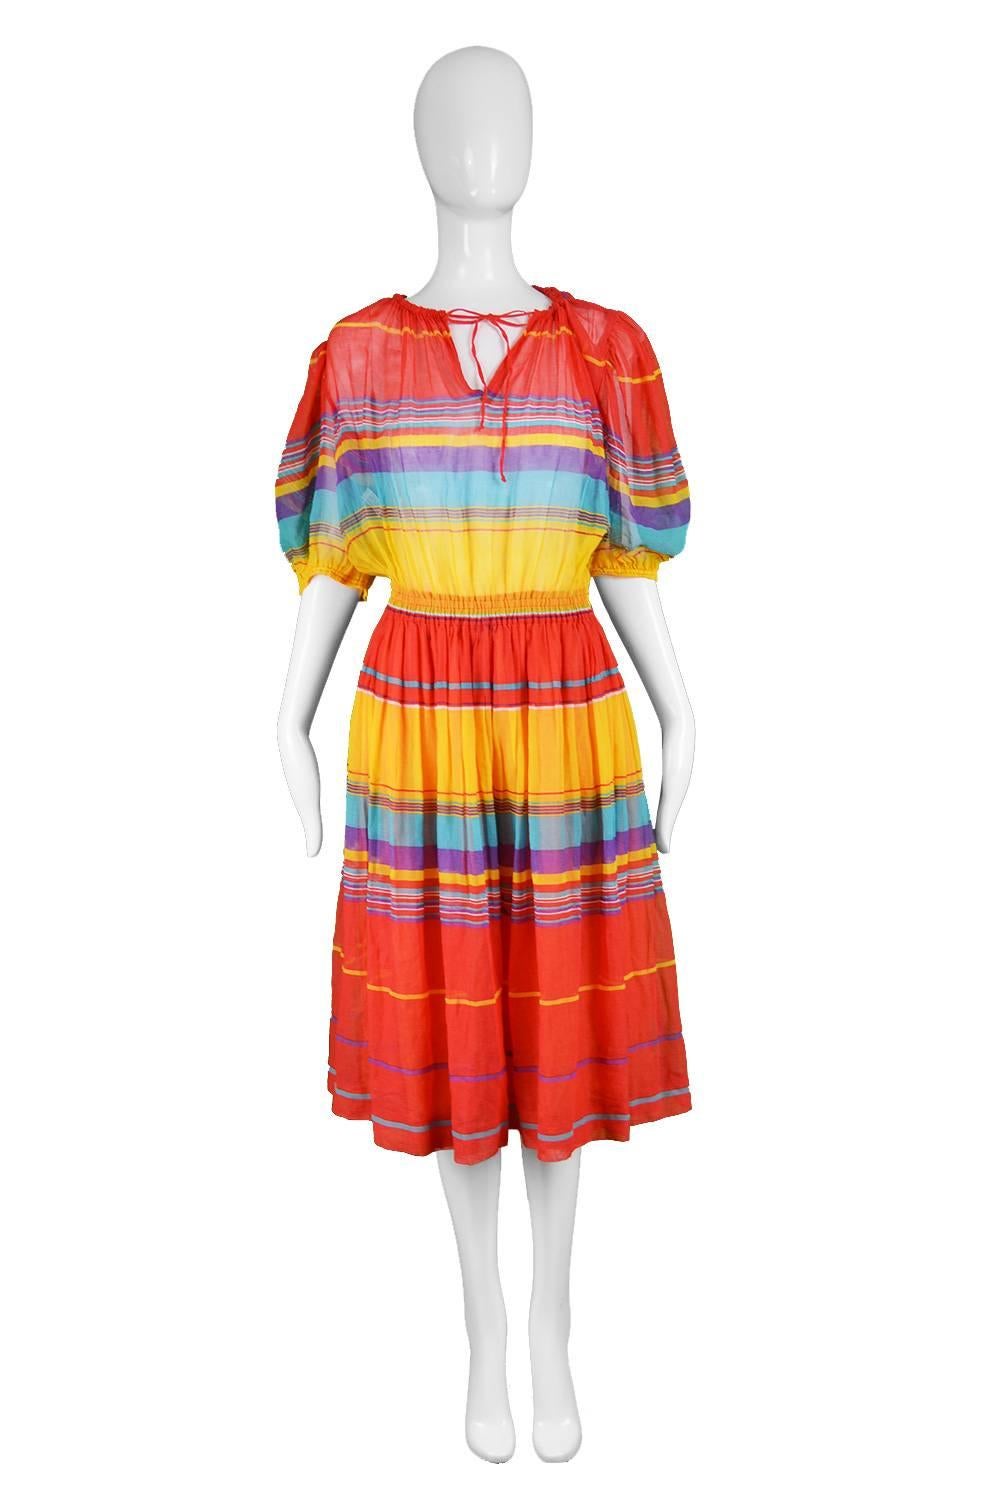 Céline Paris Vintage Brightly Multicoloured Cotton Gauze Striped Peasant Dress, 1970s

Size: best fits a women's Medium as elasticated cuffs are quite wide and bust is meant to be worn loosely. Please check measurements
Bust - up to 42” /